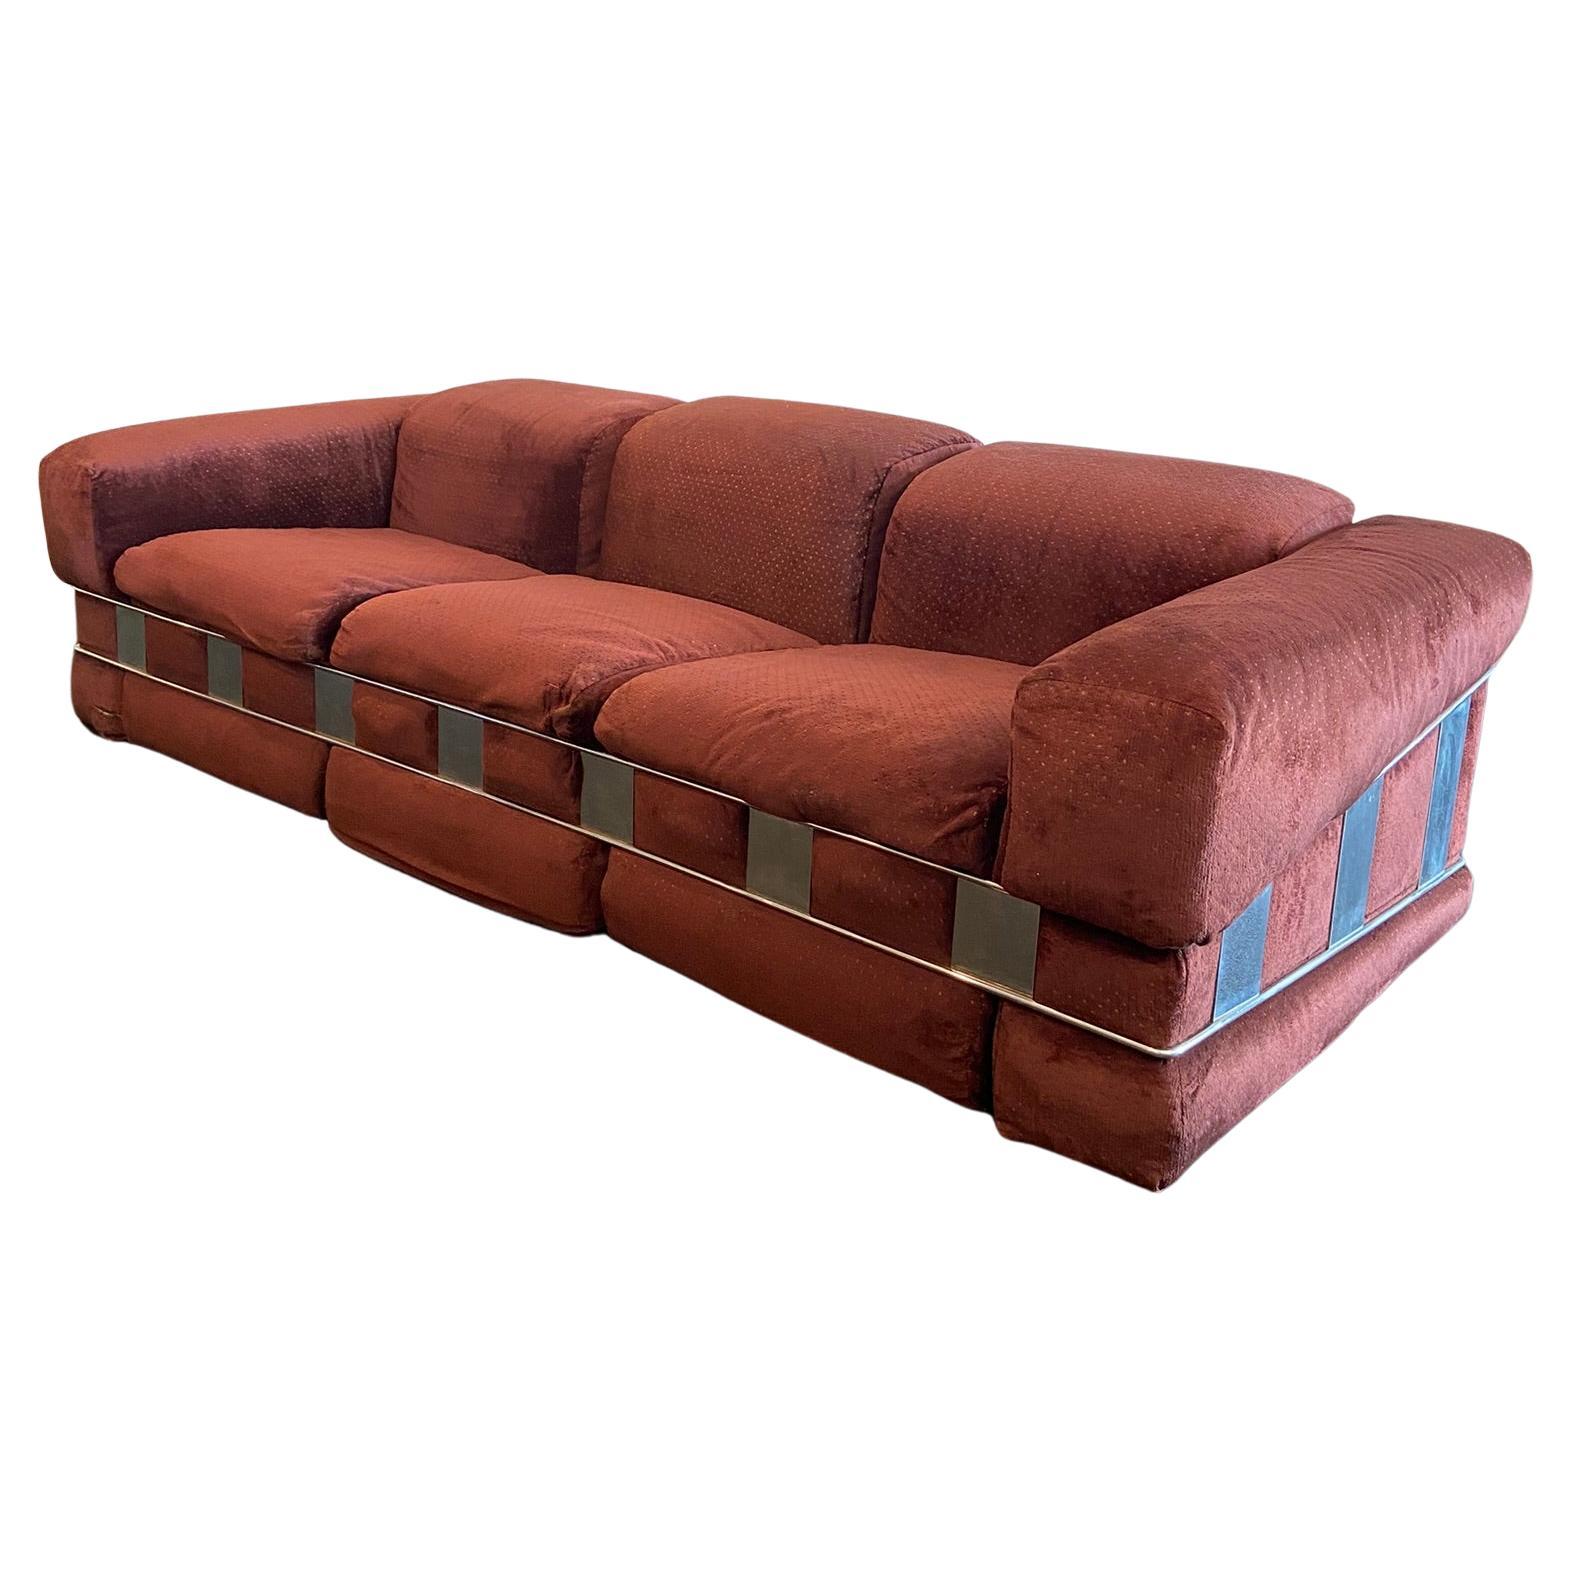 Adrian Pearsall For Craft Associates Chrome Caged Sofa